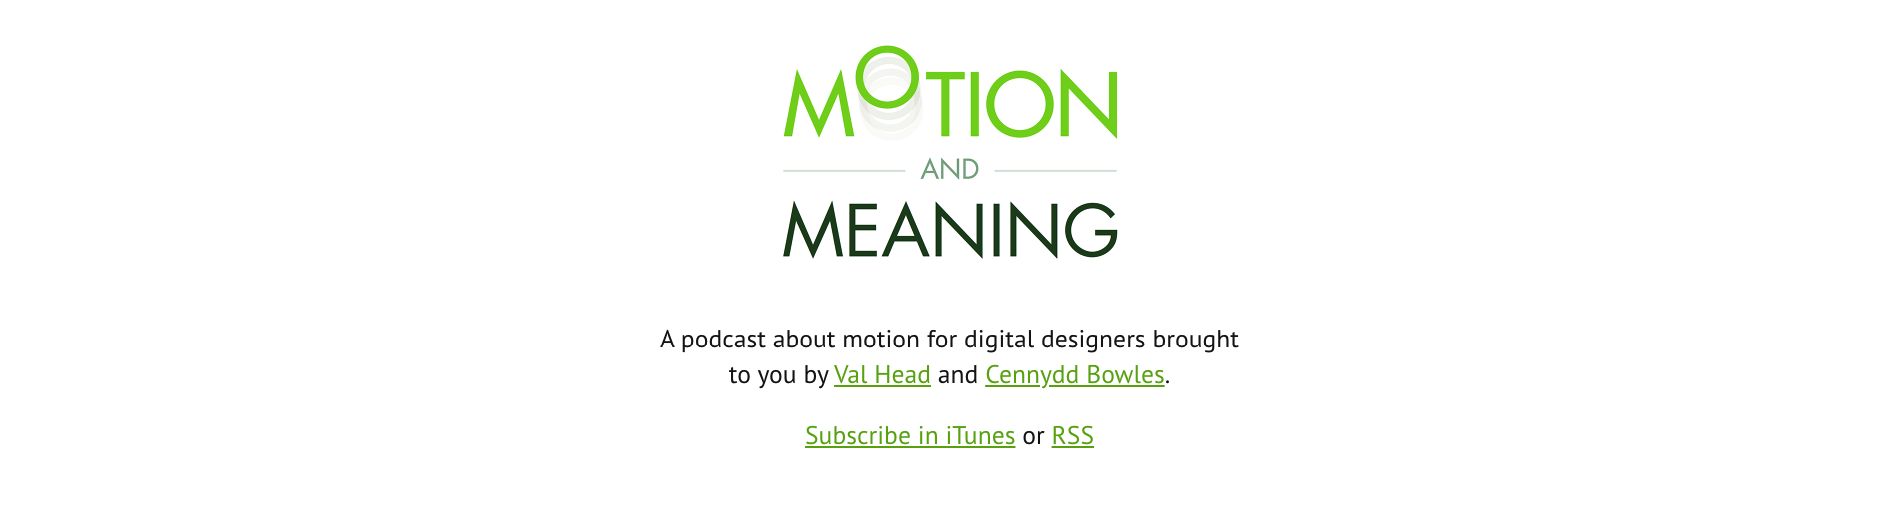 Motion and Meaning Podcast